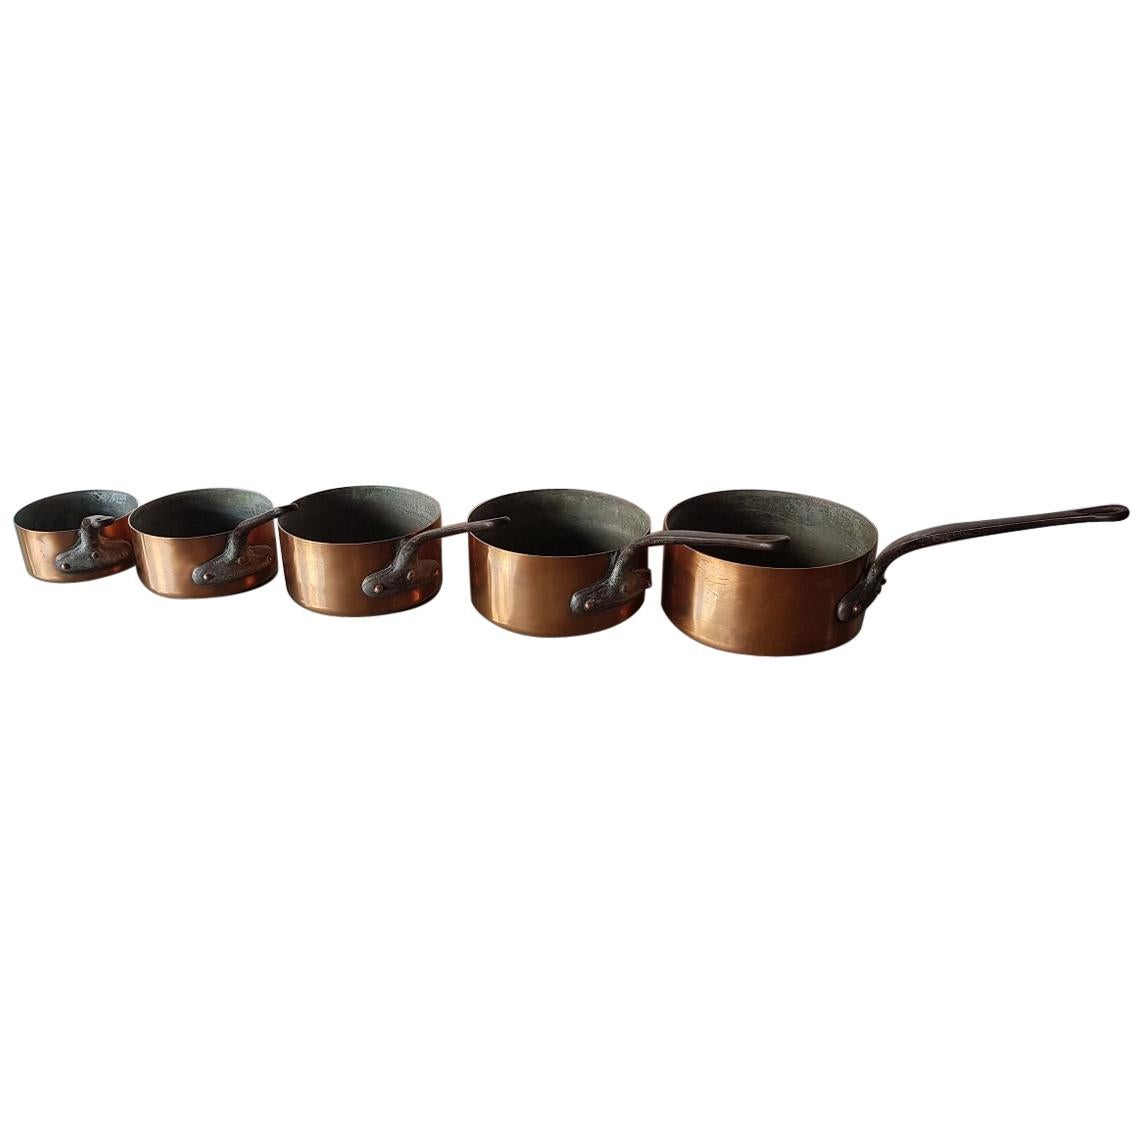 Mid-20th Century French 5-Piece Copper Marked Havard